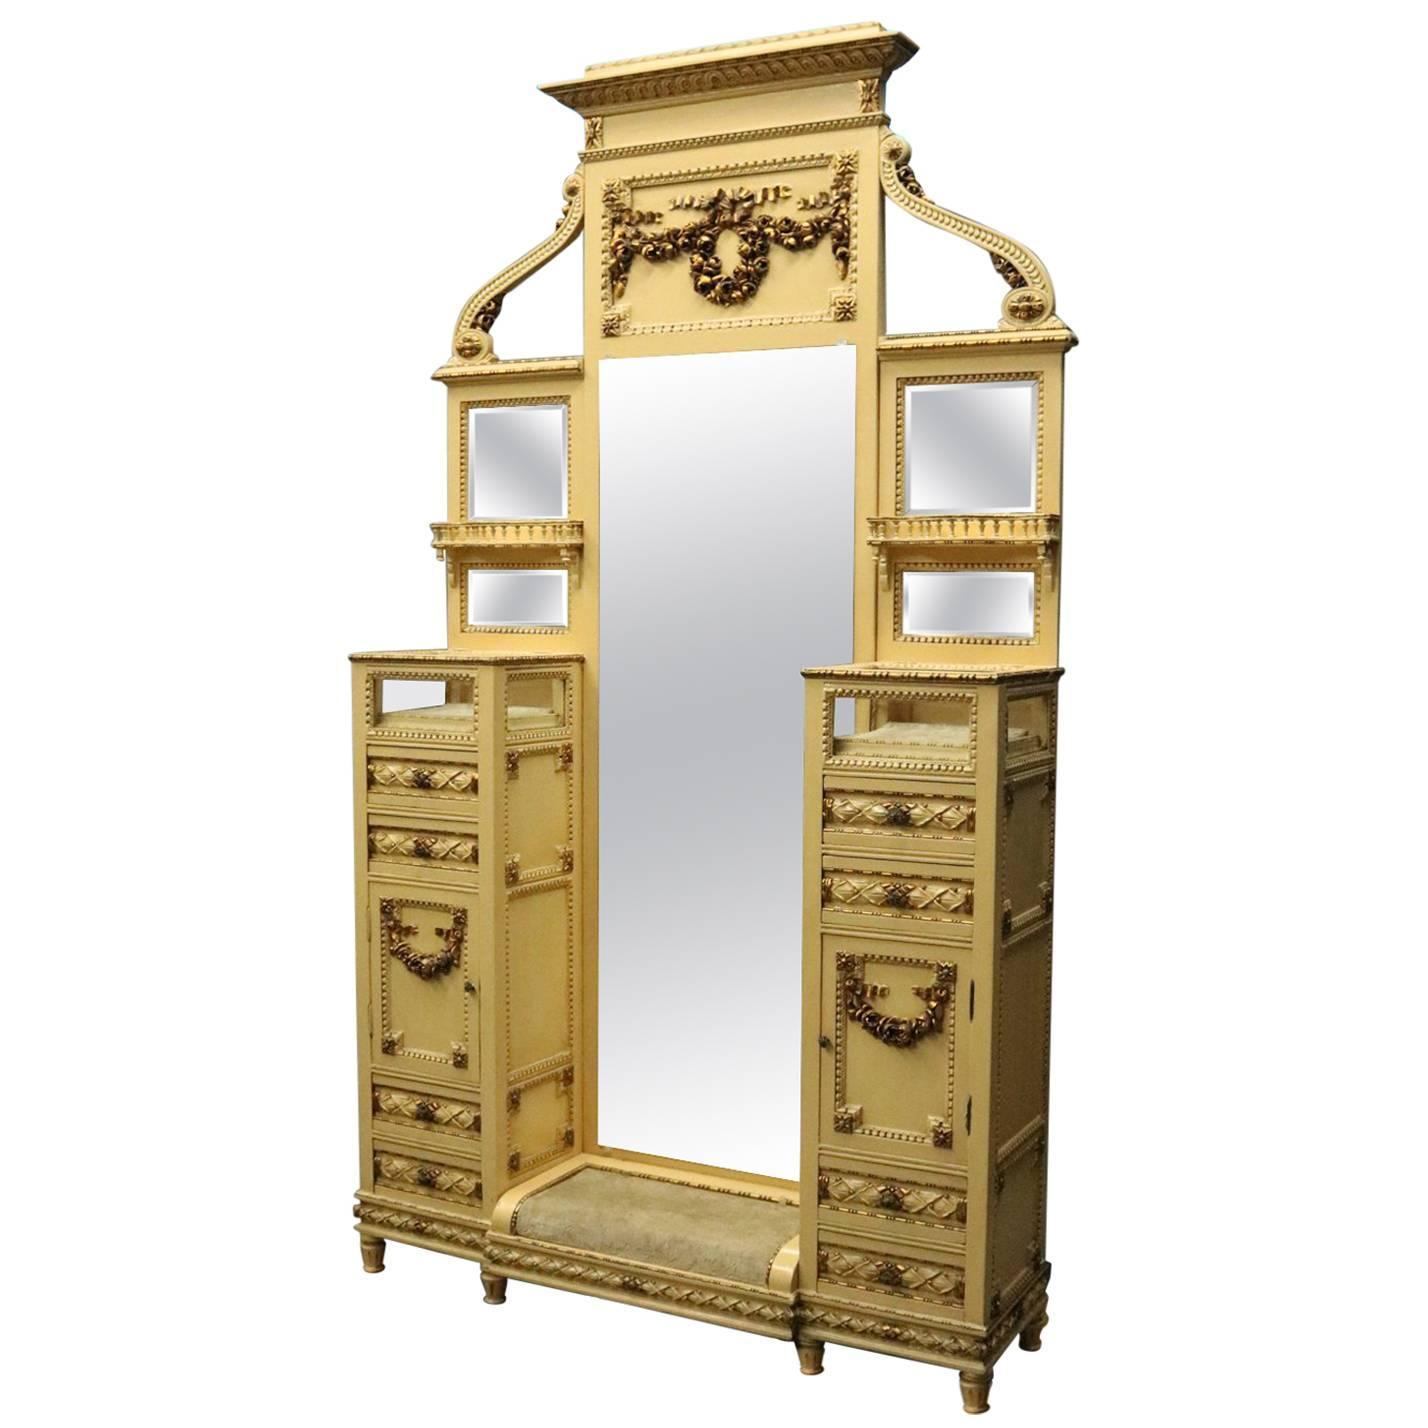 Antique French Provincial Dressing Tale/Stand, Cheval Mirror and Vitrines